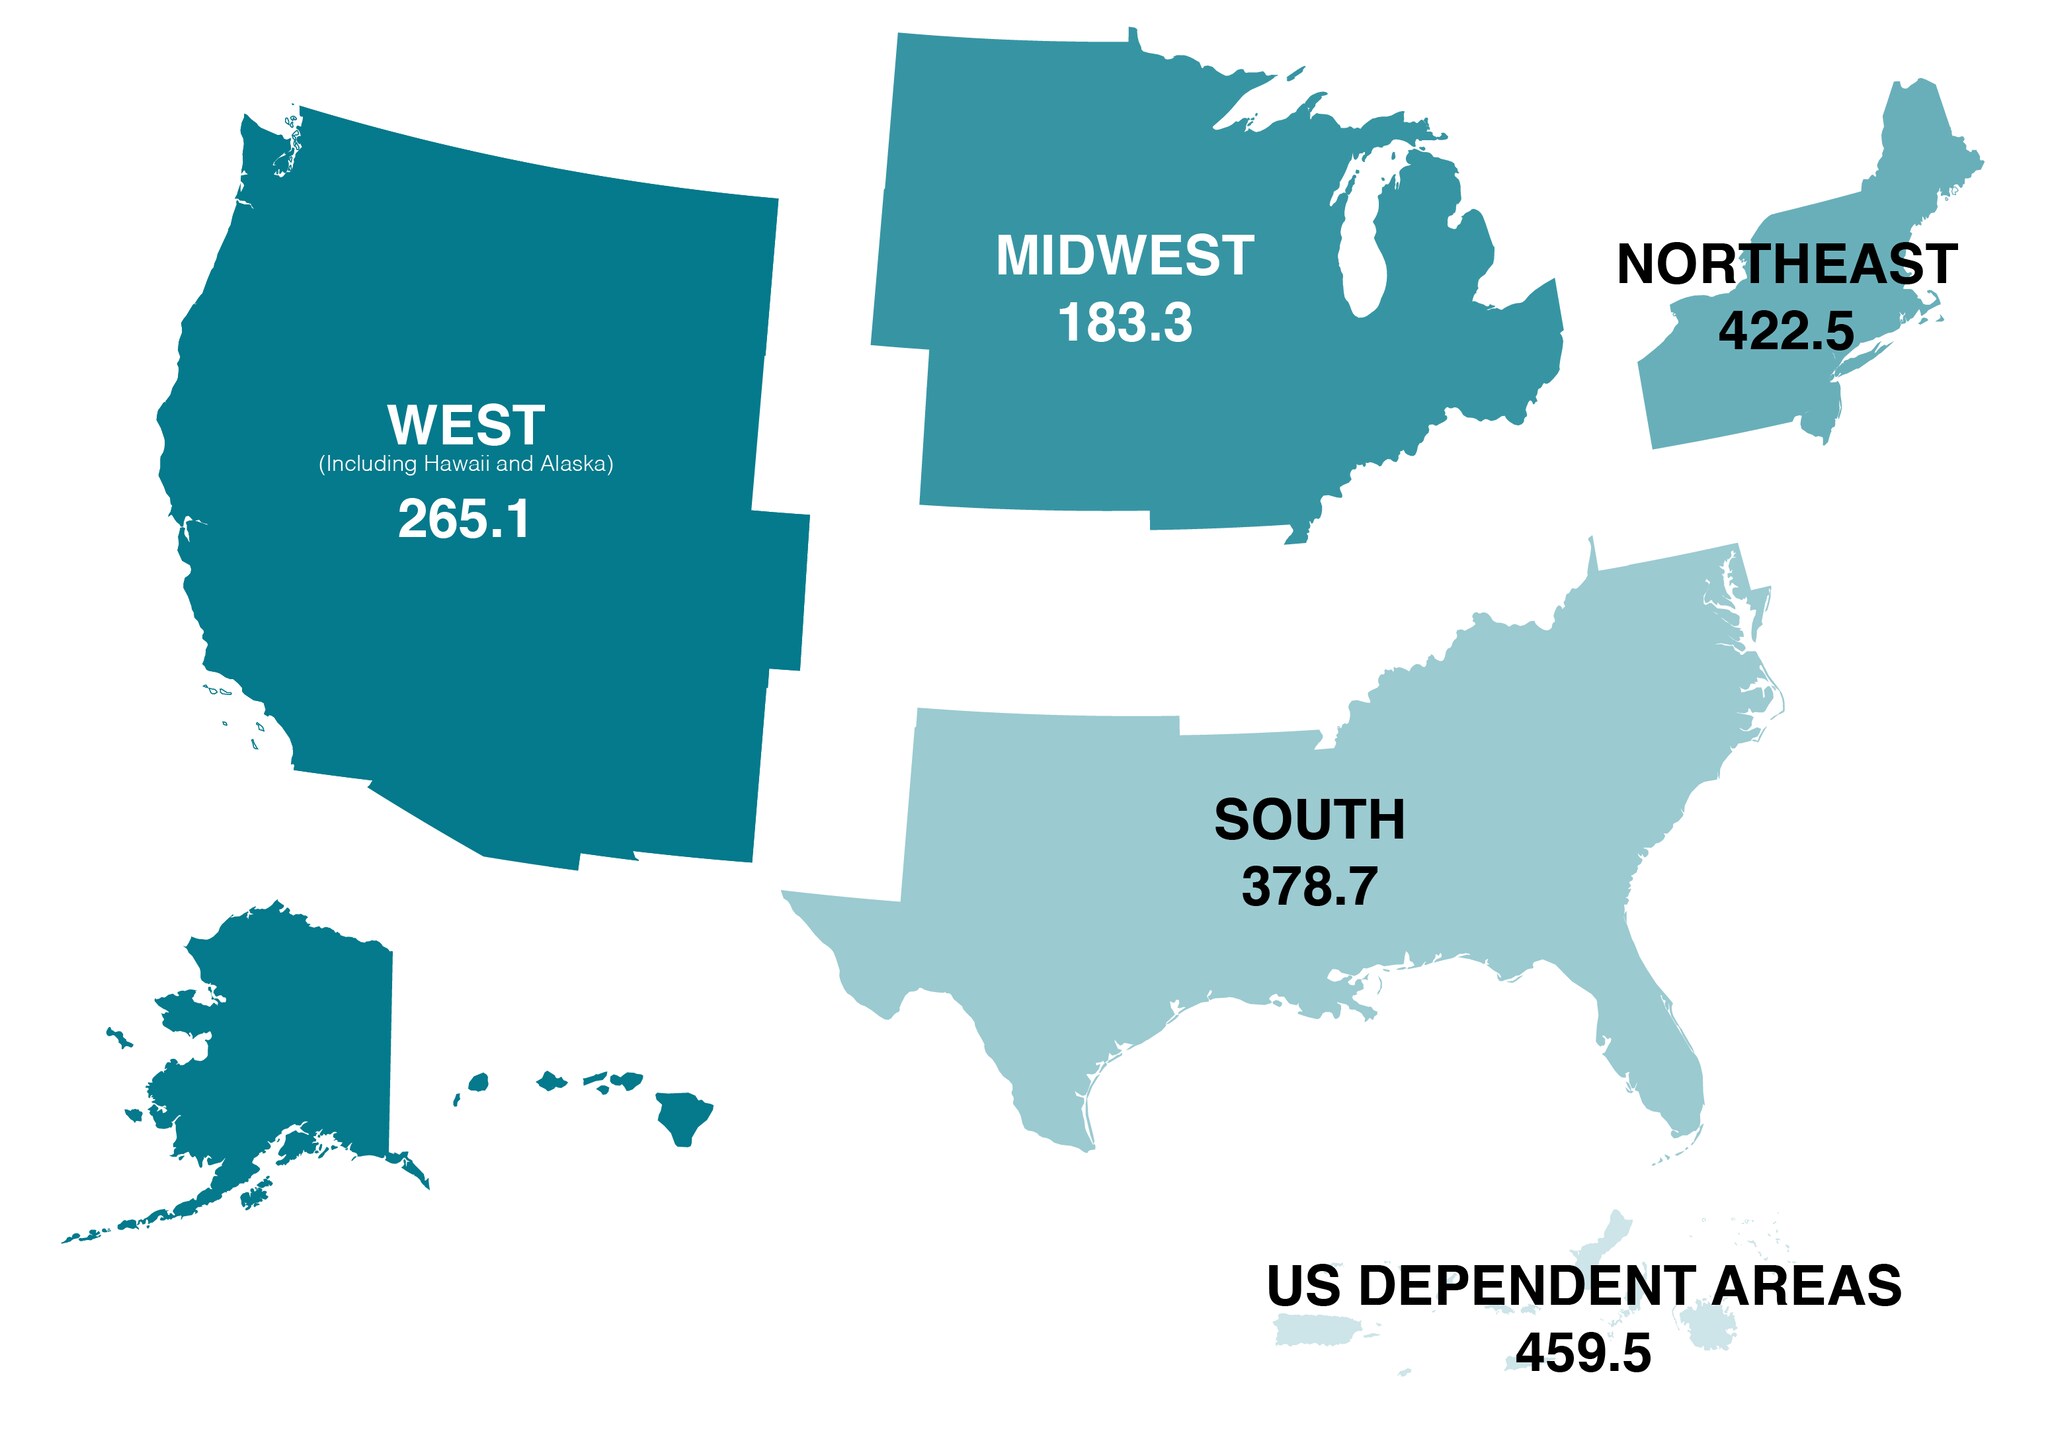 Rate per 100,000 people - US Dependent Areas: 459.5; Northeast: 422.5; South: 378.7; West: 265.1; Midwest: 183.3.